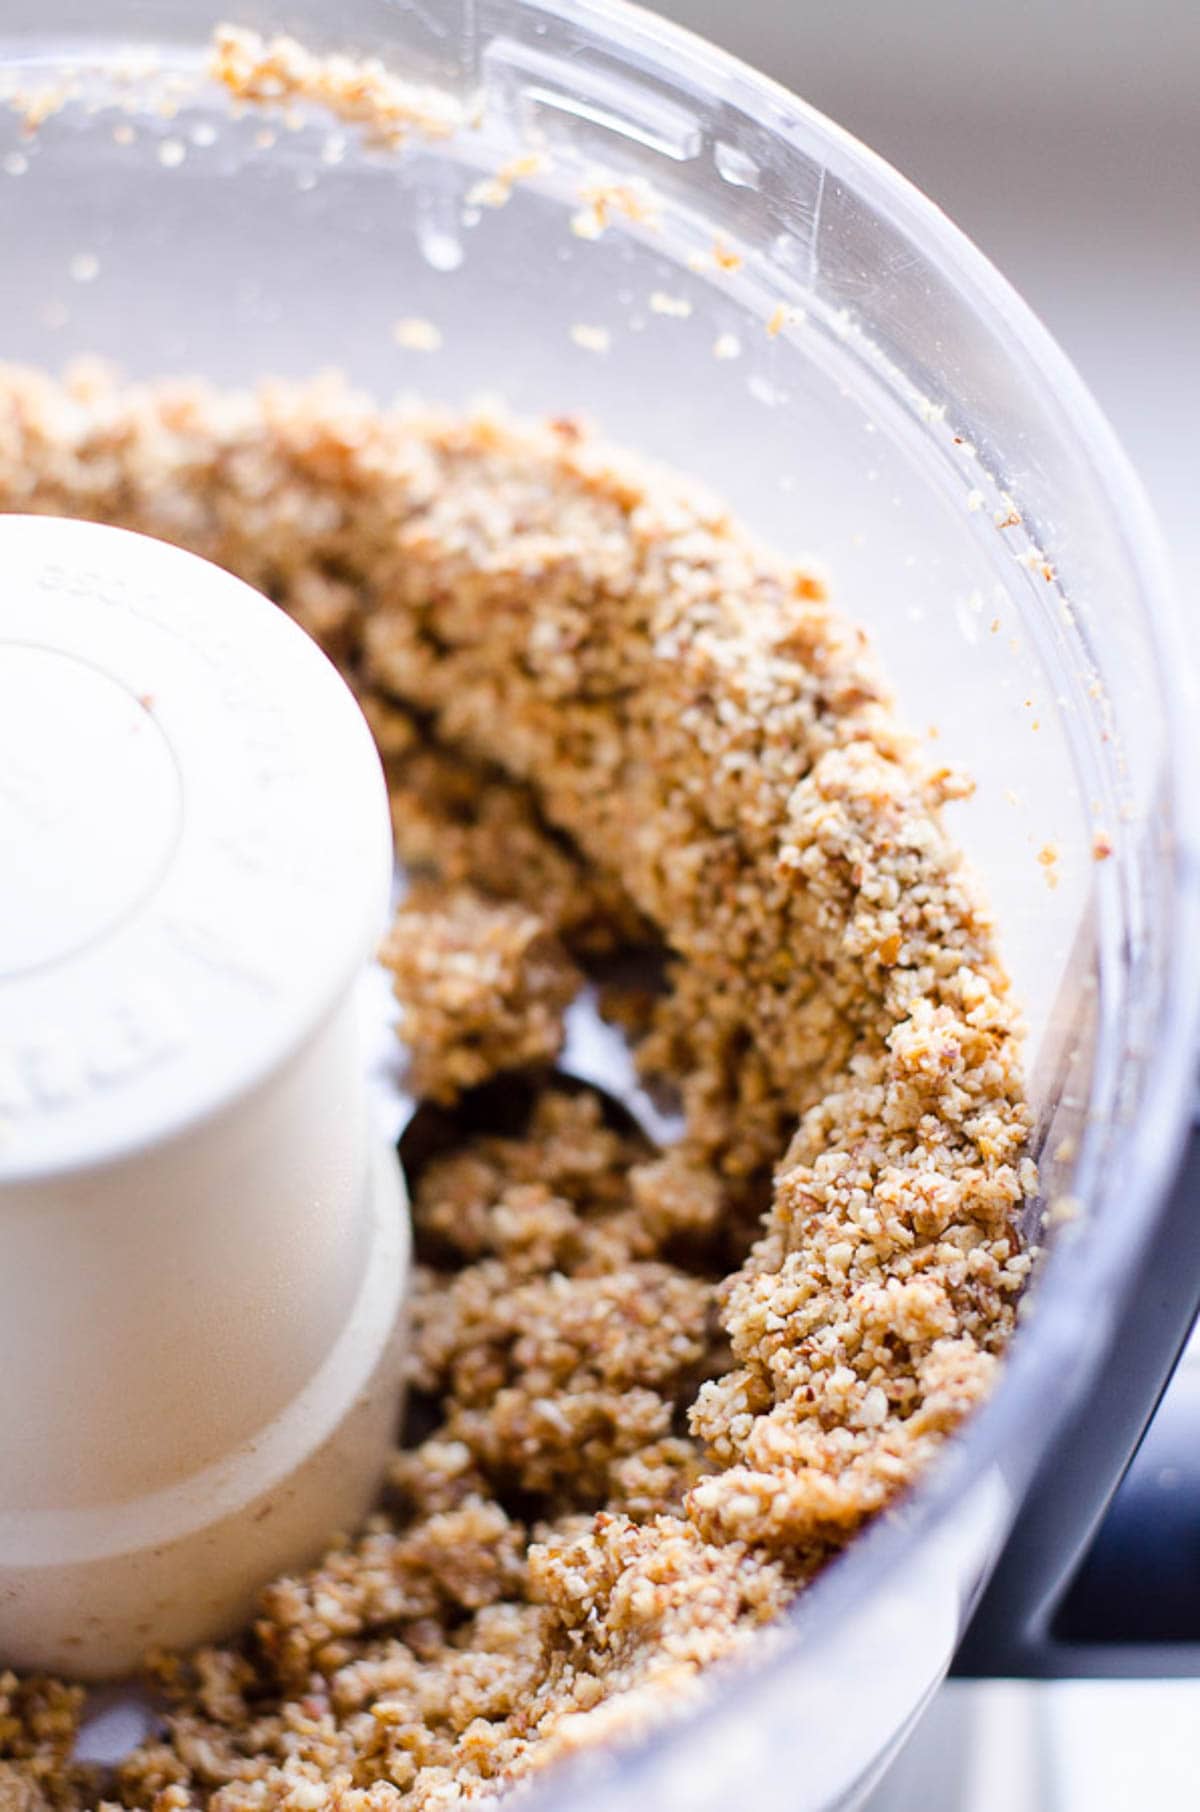 Ground almond and oats in food processor.